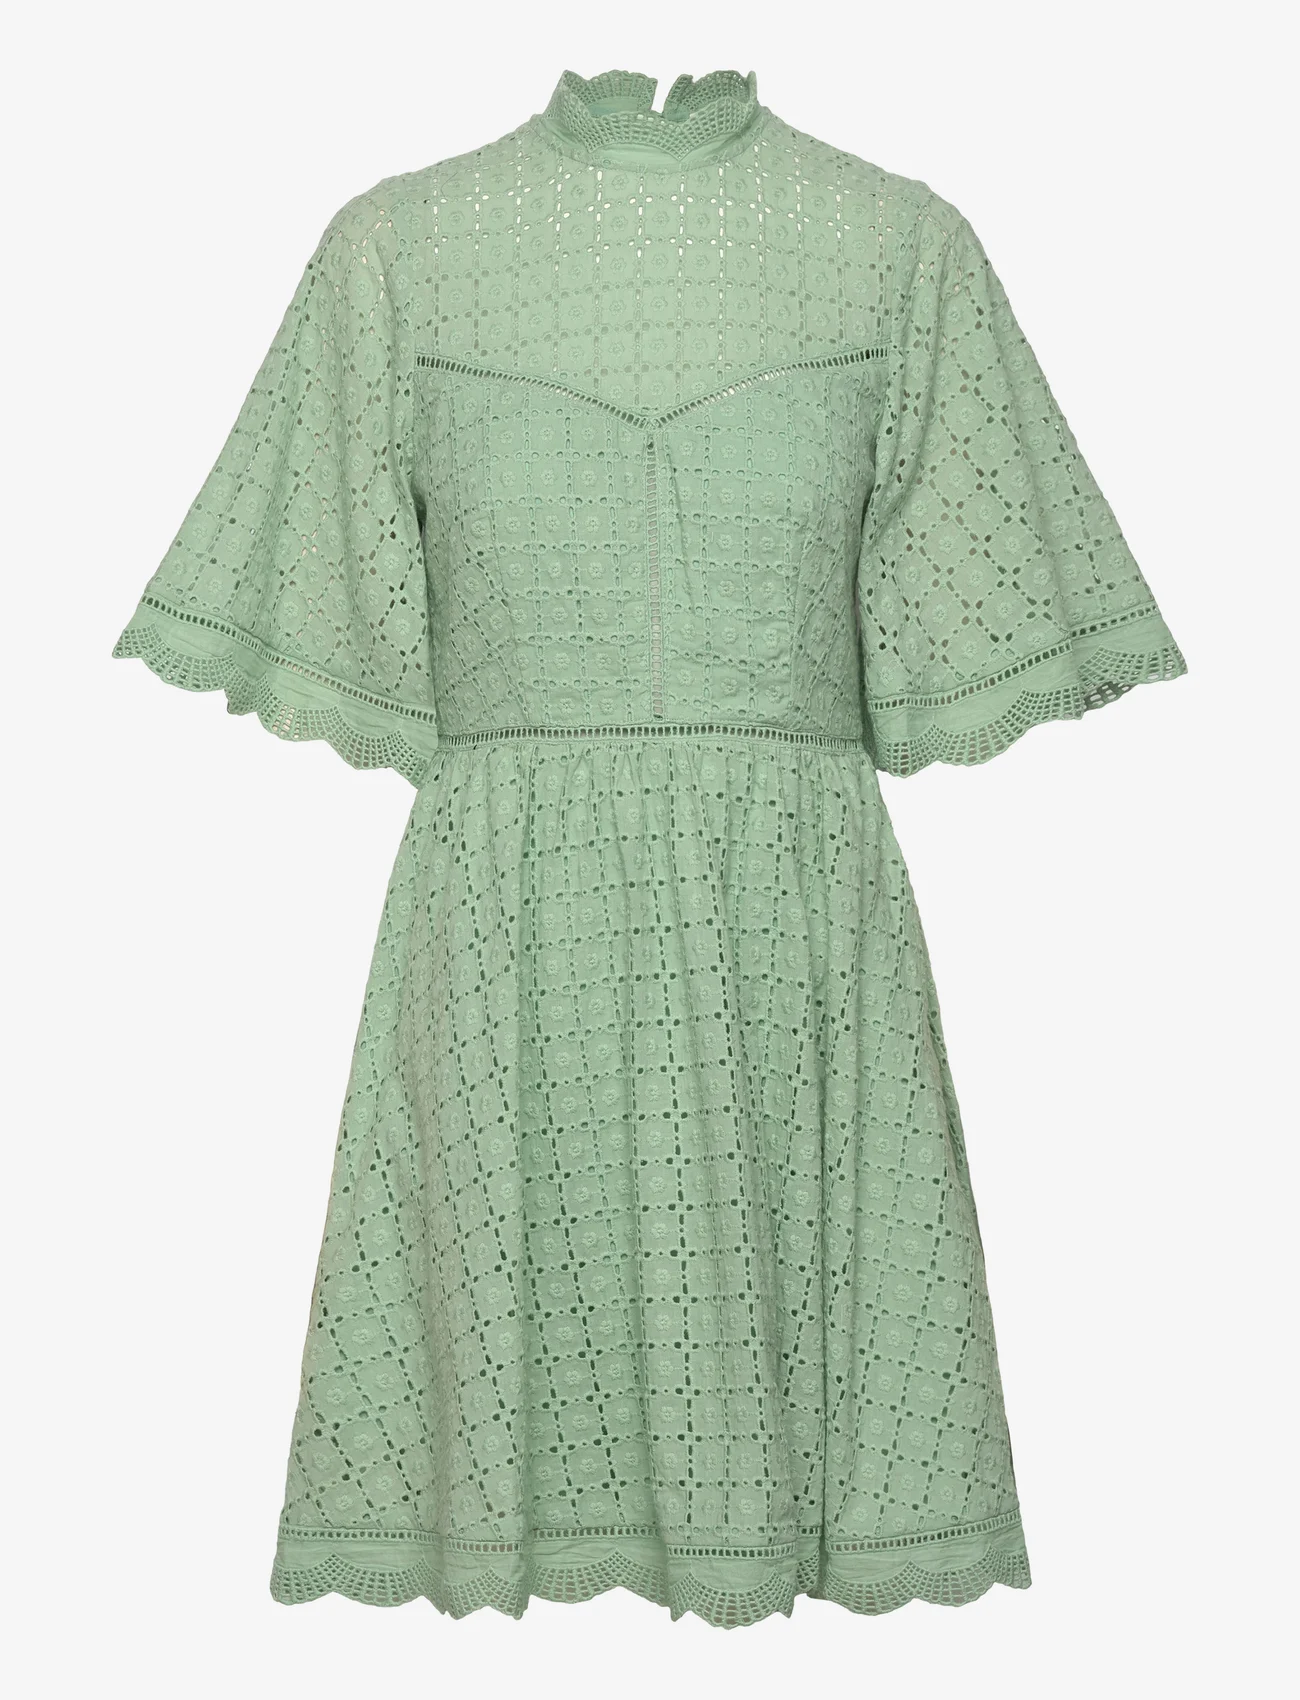 Malina - Claire mini lace dress - party wear at outlet prices - seafoam - 0